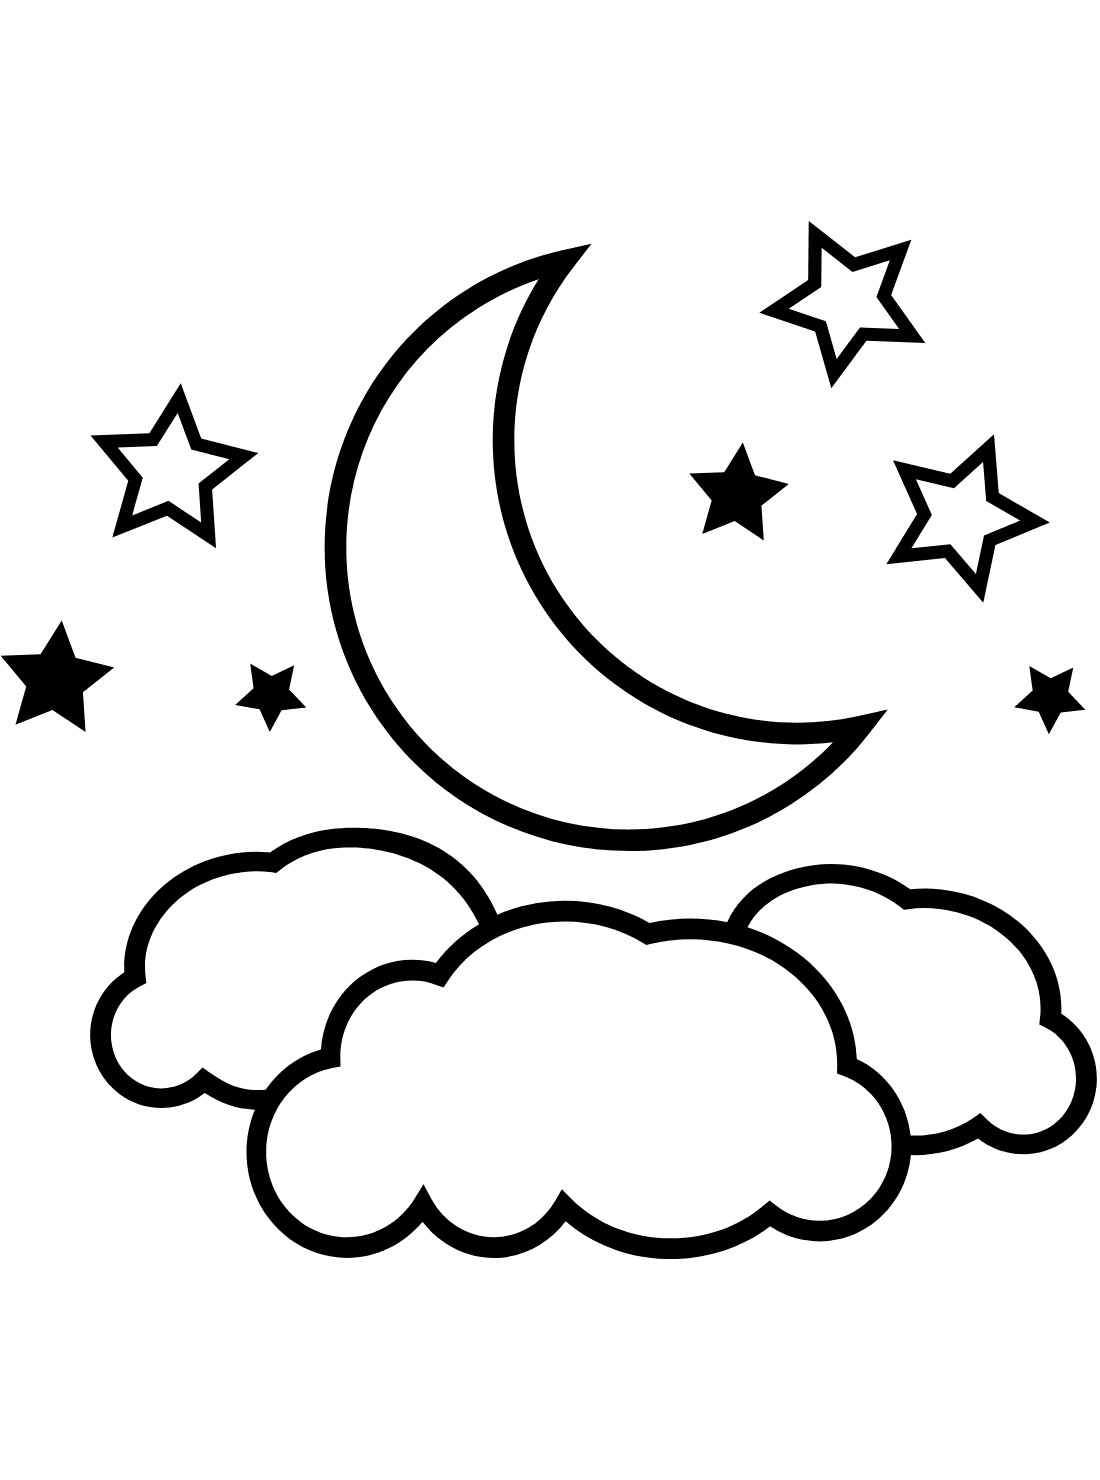 Sky coloring pages printable